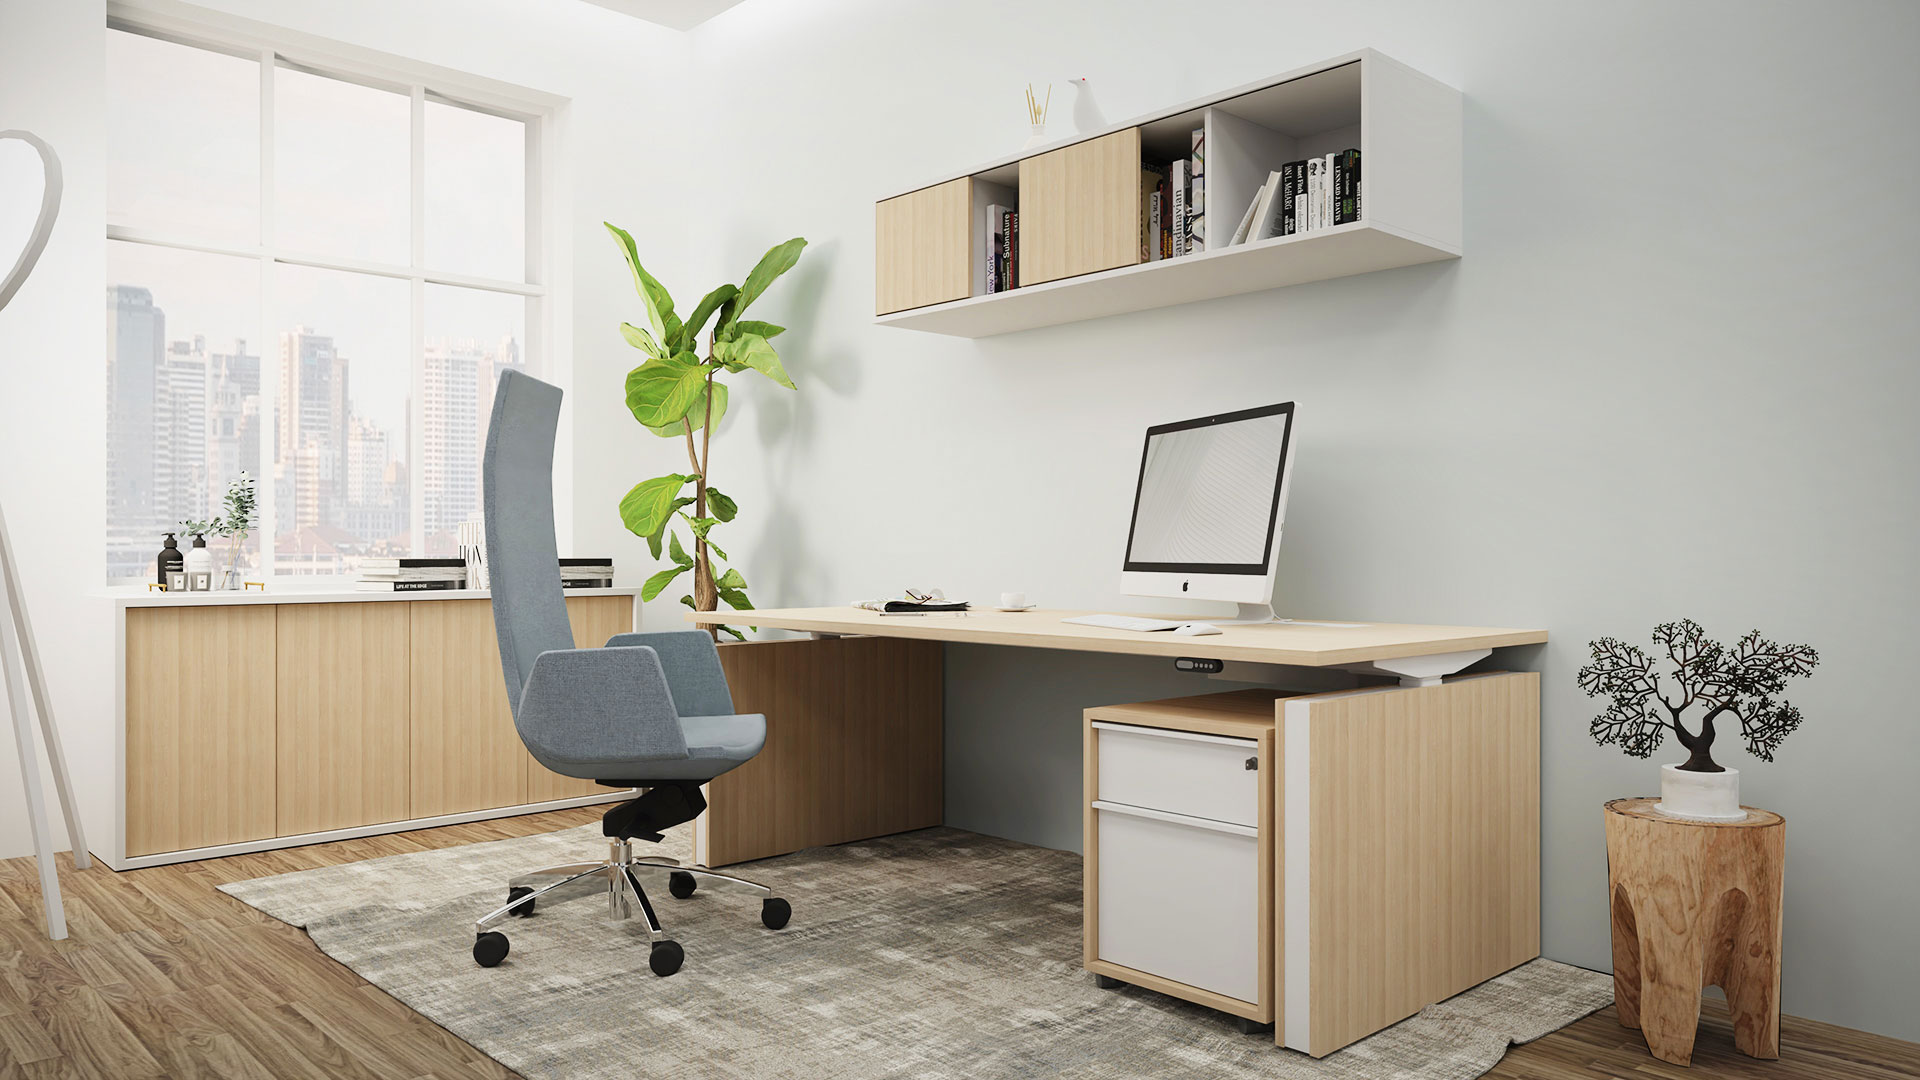 Transform your home office space with Motion Executive furniture